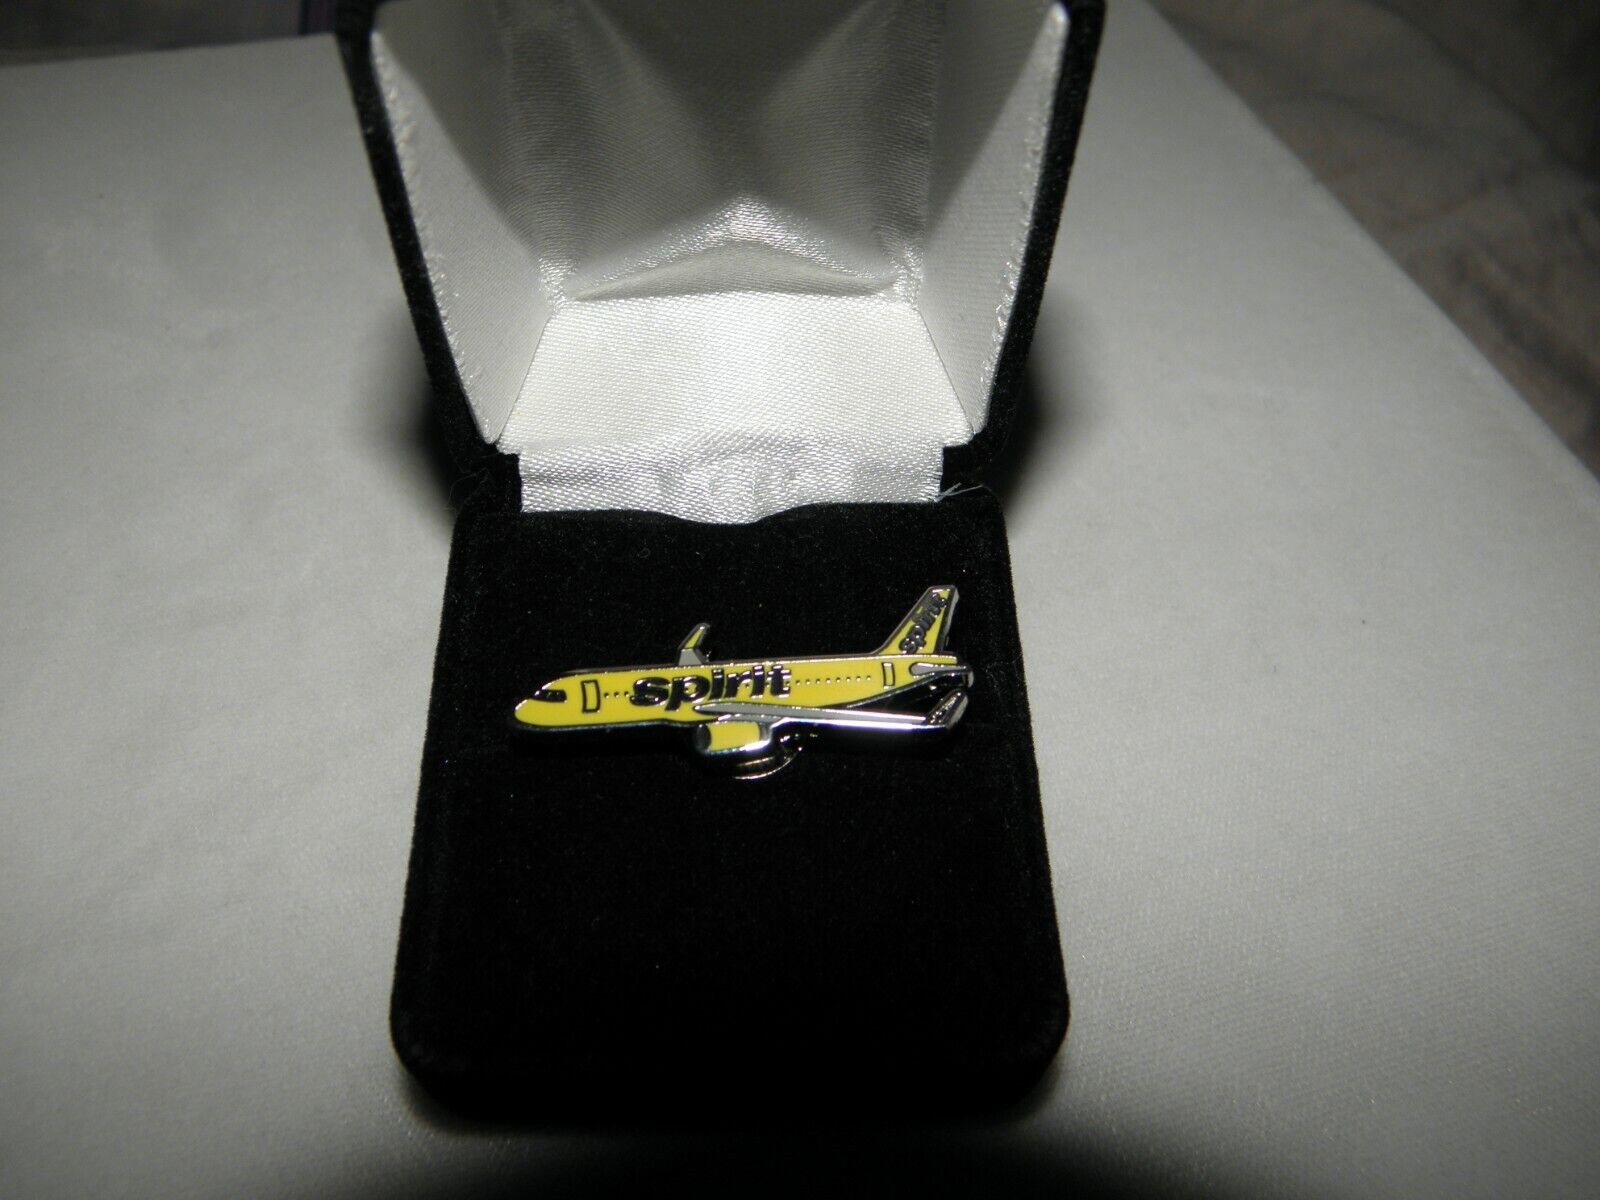 SPIRIT AIRLINES A320 AIRBUS AIRPLANE LAPEL TACK PIN AIRLINE PILOT GIFT NEW COLOR